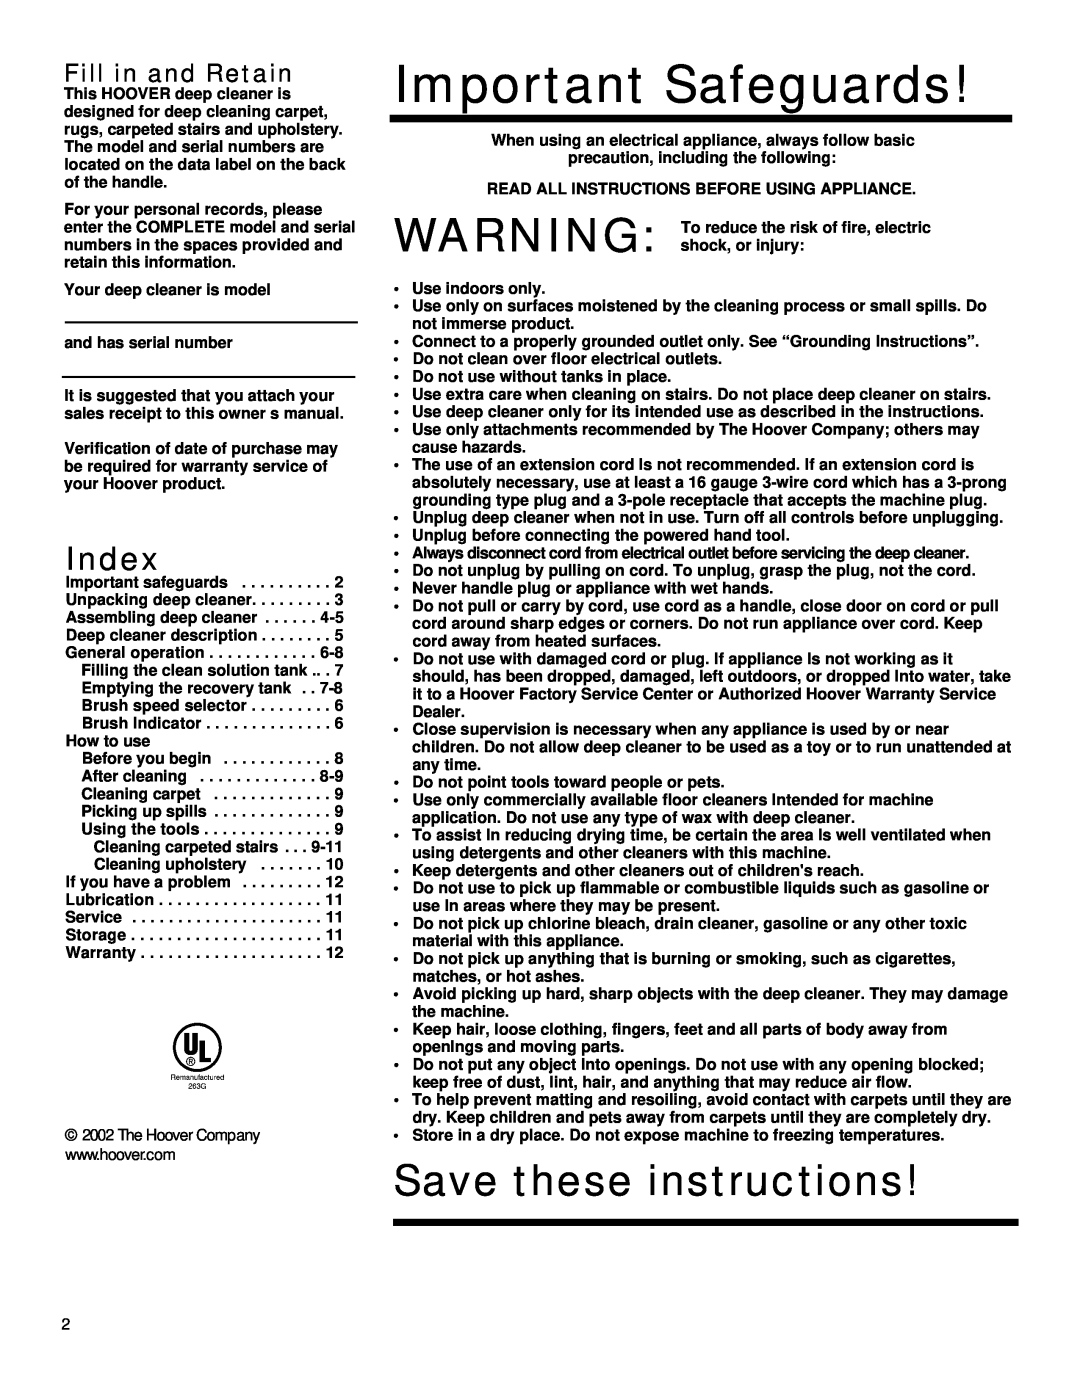 Hoover Plus owner manual Save these instru c t i o n s, Index, Fill in and Retain, Important Safeguards 